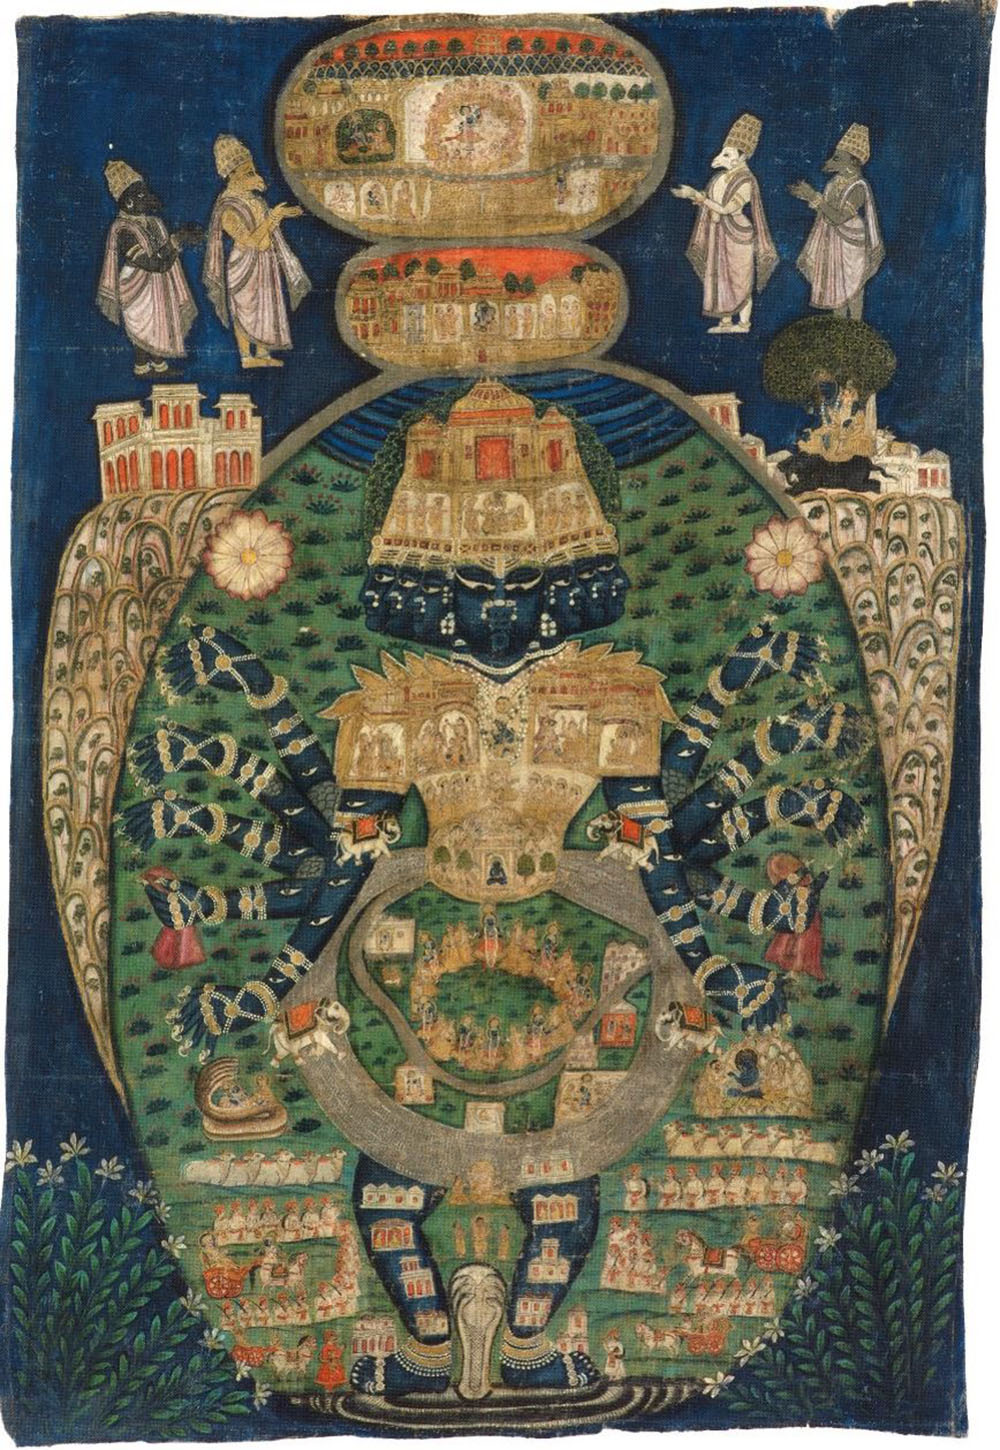 Cosmic Form of Krishna
circa 1800–1900
India; Rajasthan or Gujarat
opaque watercolors and ink on cloth
Lent by Julia Emerson
H: 52 in. W: 35 1/2 in. (132 x 90.2 cm)
